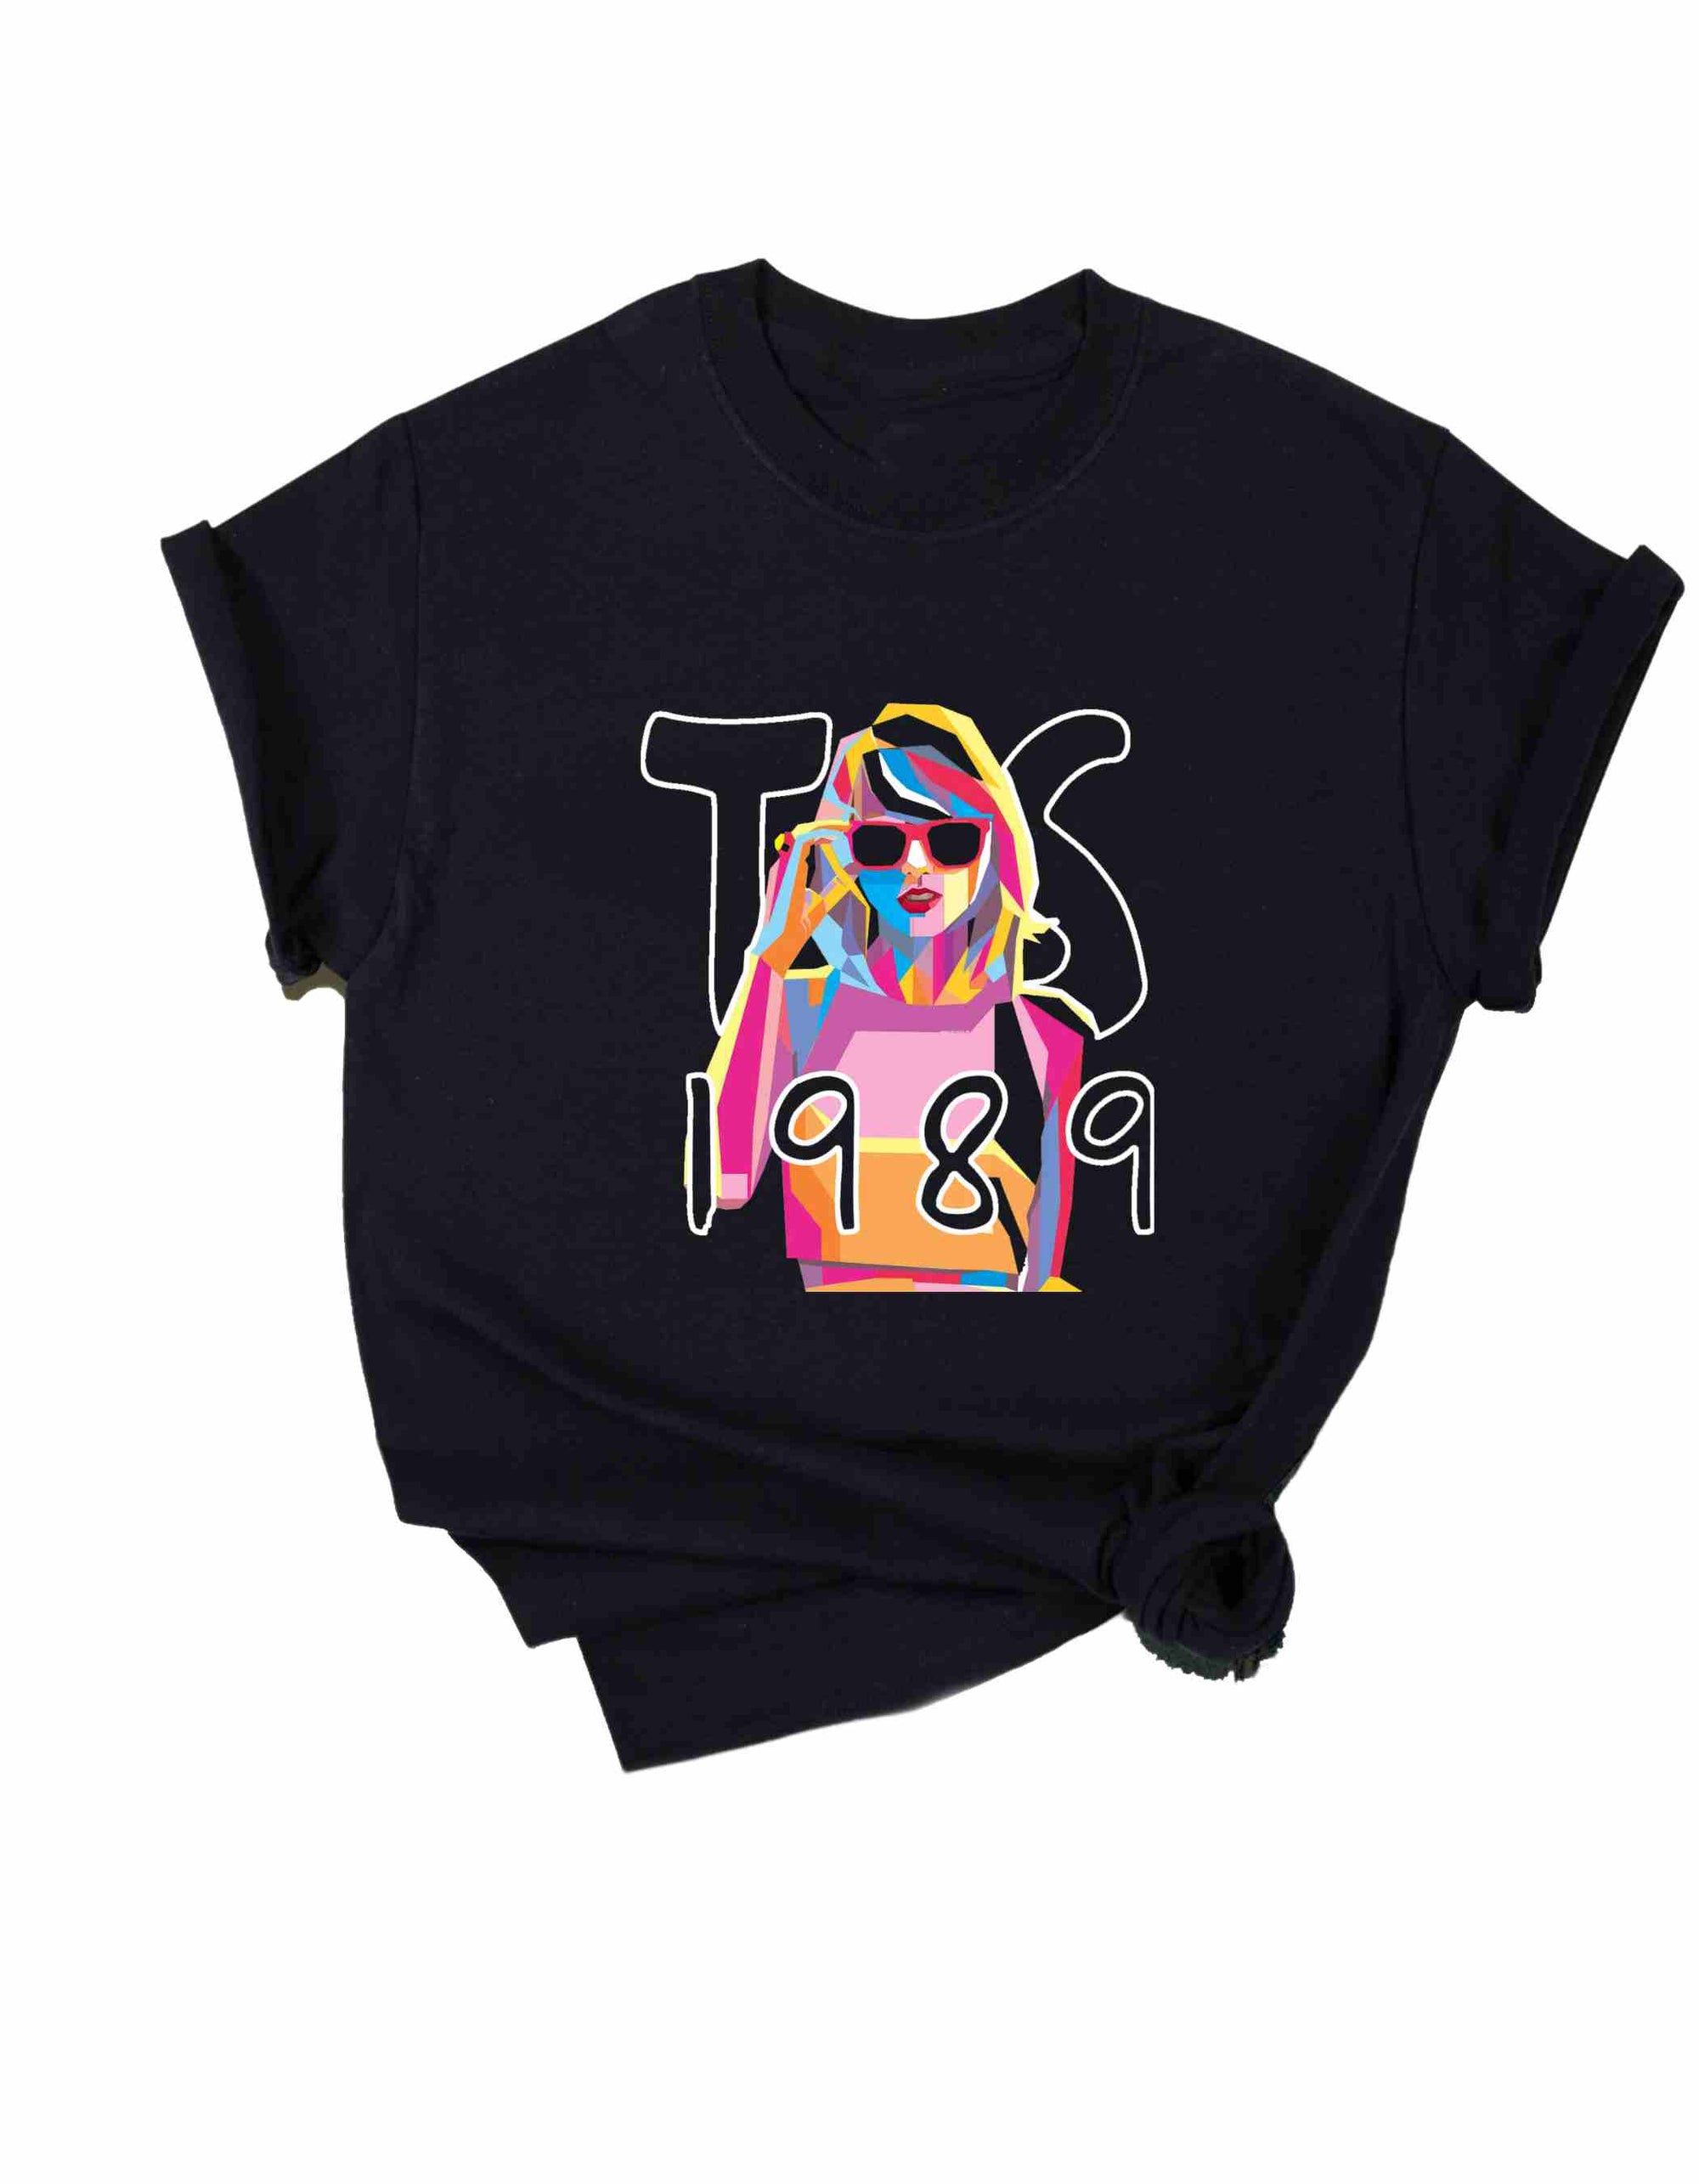 TAYLOR SWIFT Tee | Black or Pink | Adult & Youth